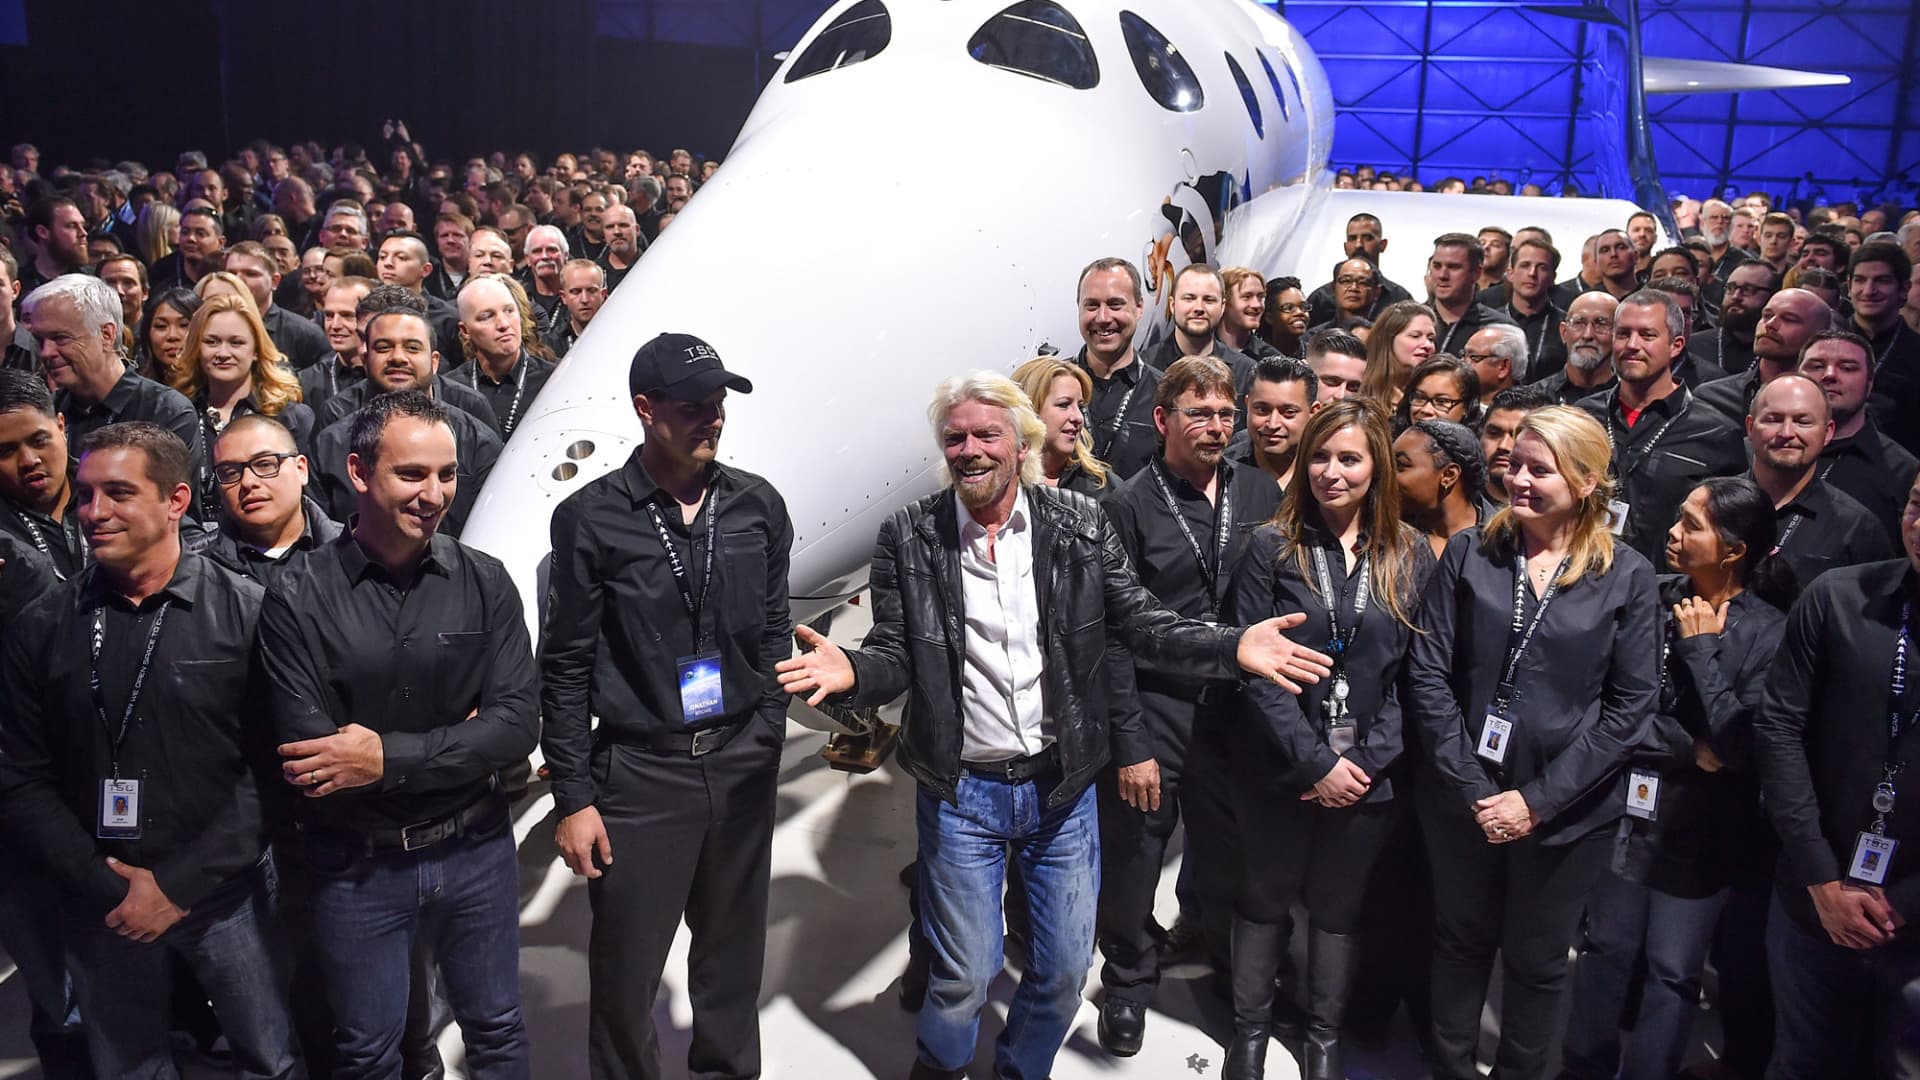 Virgin Galactic's Richard Branson, front center, gathers with Virgin Galactic employees in front of the new SpaceShip Two VSS Unity after a roll-out ceremony of the new aircraft at the Mojave Air and Space Port on February 19, 2016 in Mojave, Ca.